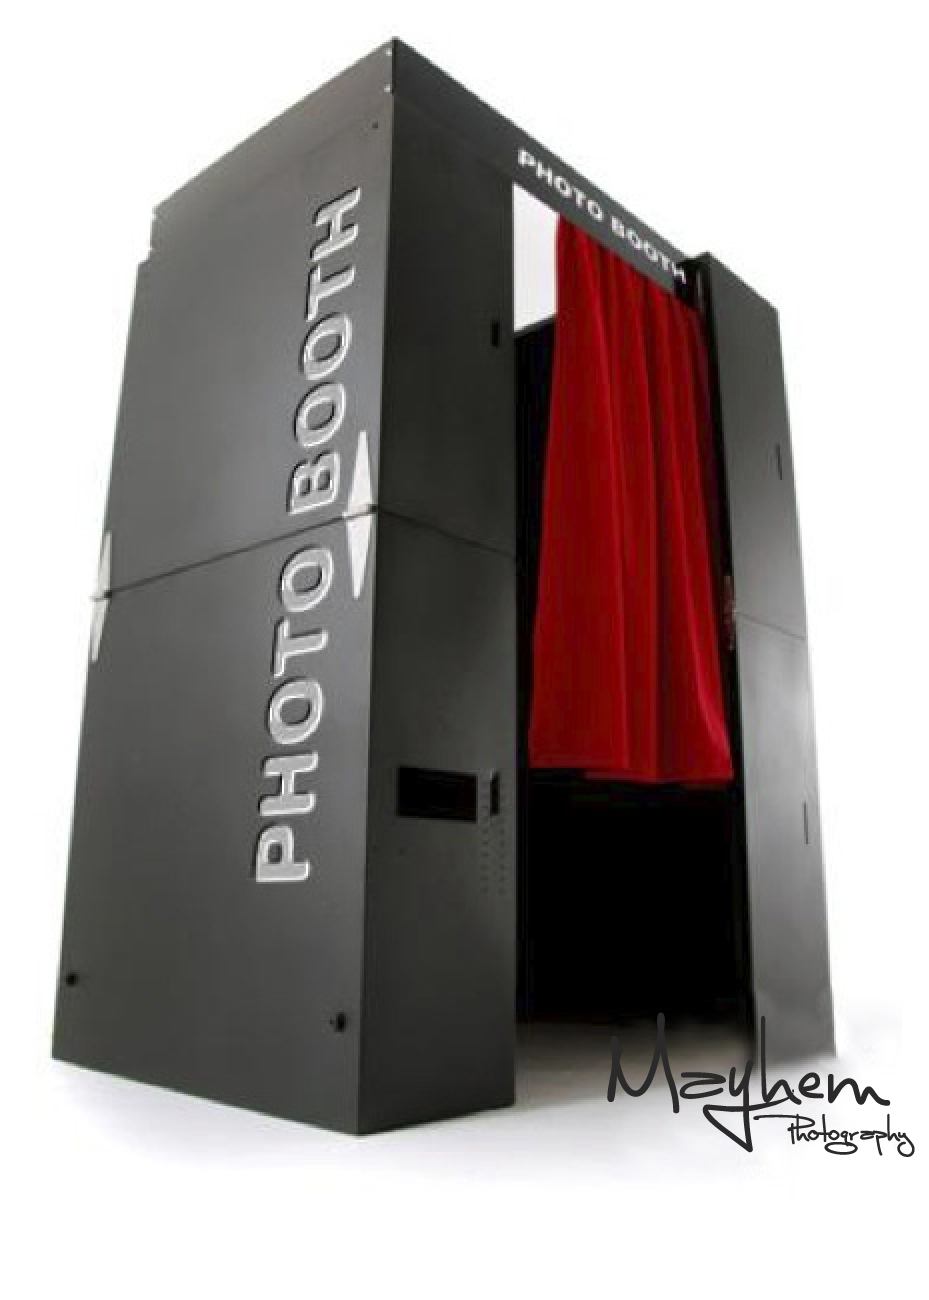 Pixel Photo Booth Hire | home goods store | 833 W Mount Cotton Rd, Sheldon QLD 4157, Australia | 0411167232 OR +61 411 167 232